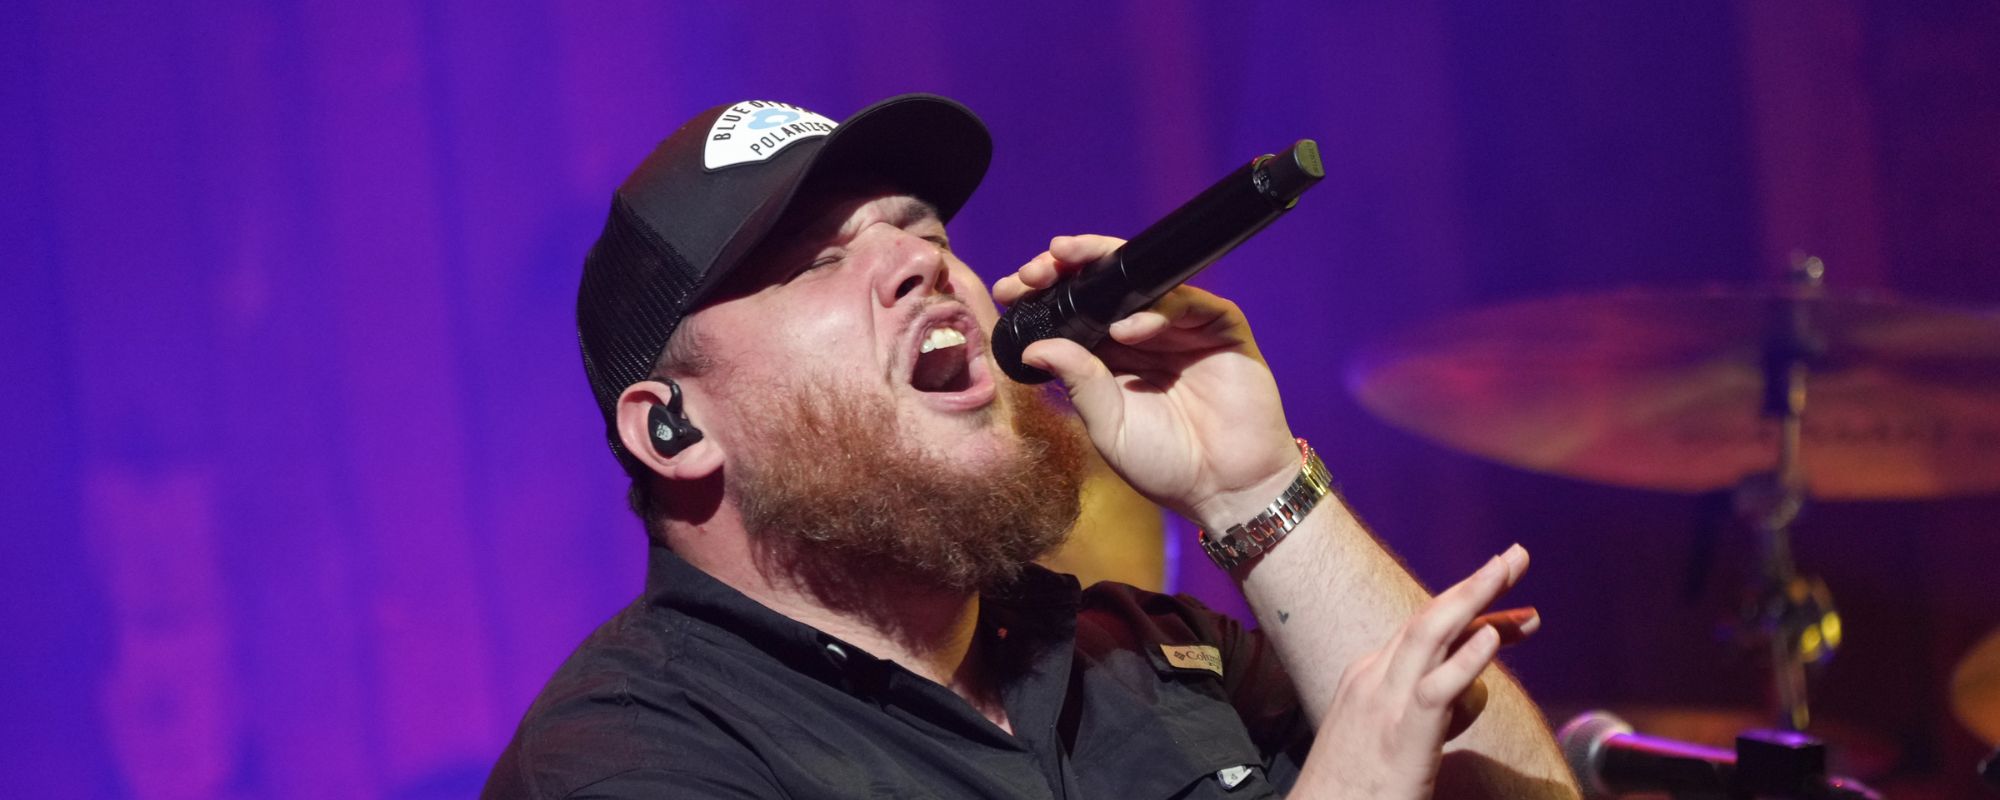 Luke Combs Takes a Tumble and Falls on Stage at Levi’s Stadium, Plays it Off Like a Champ